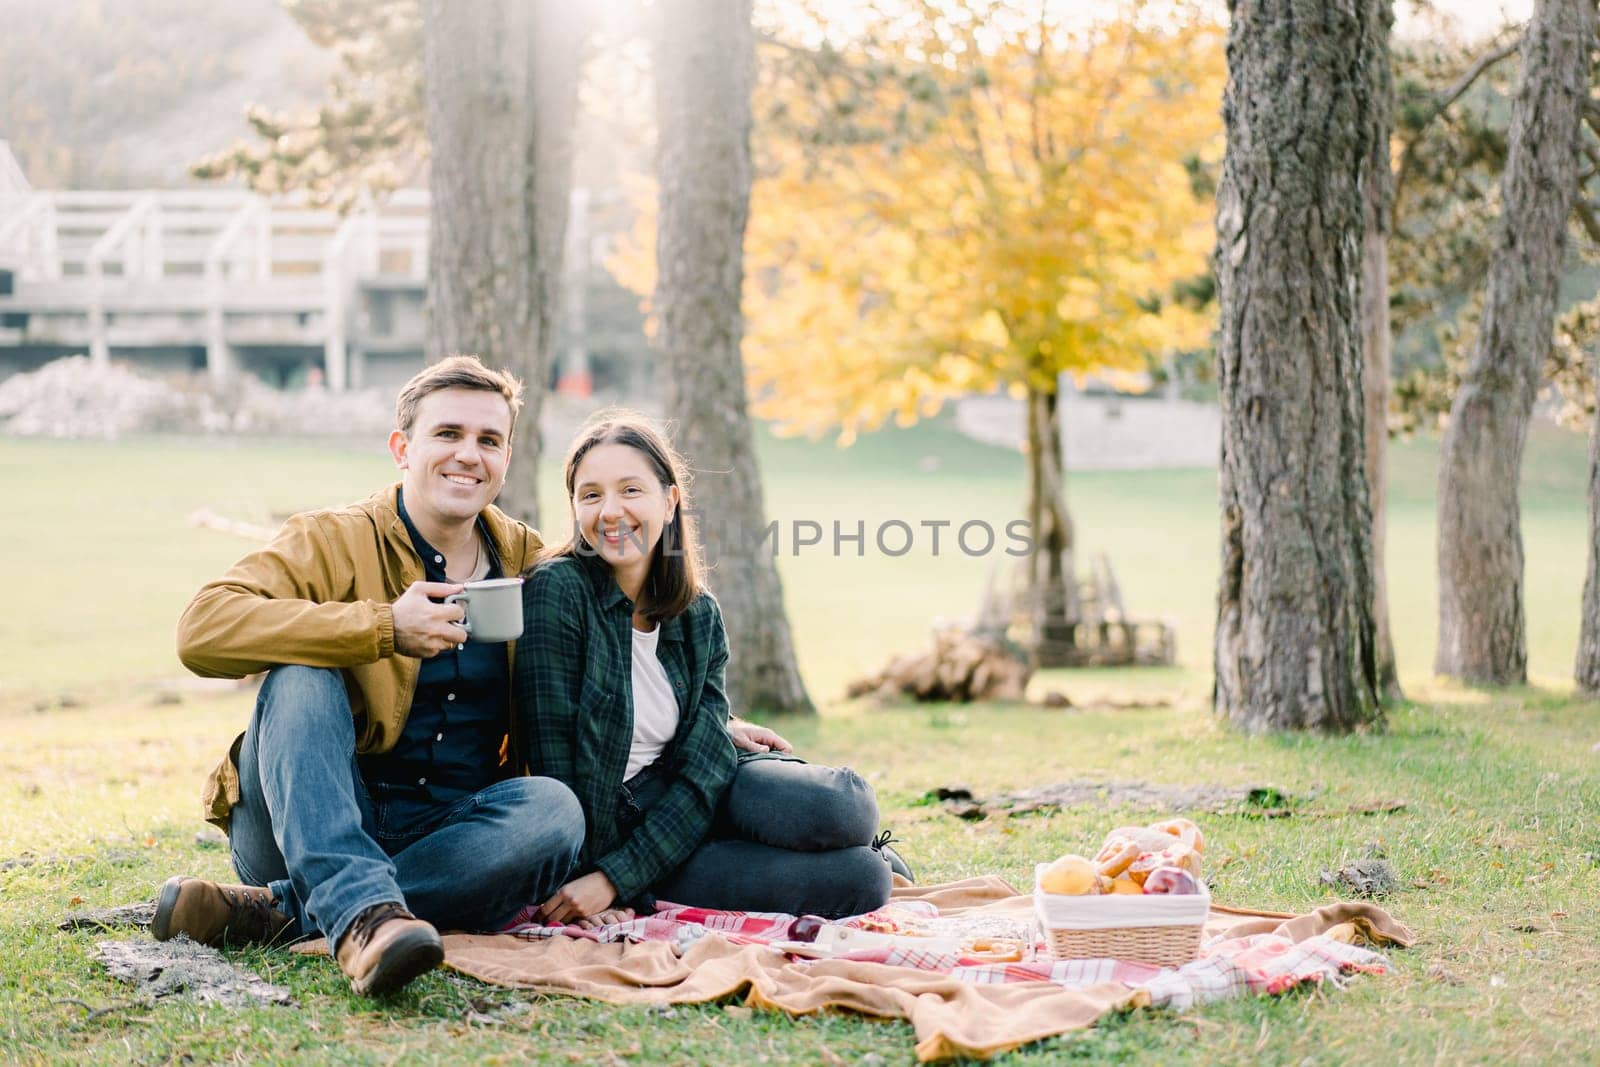 Smiling man with mug hugging woman while sitting on blanket in park near food basket by Nadtochiy